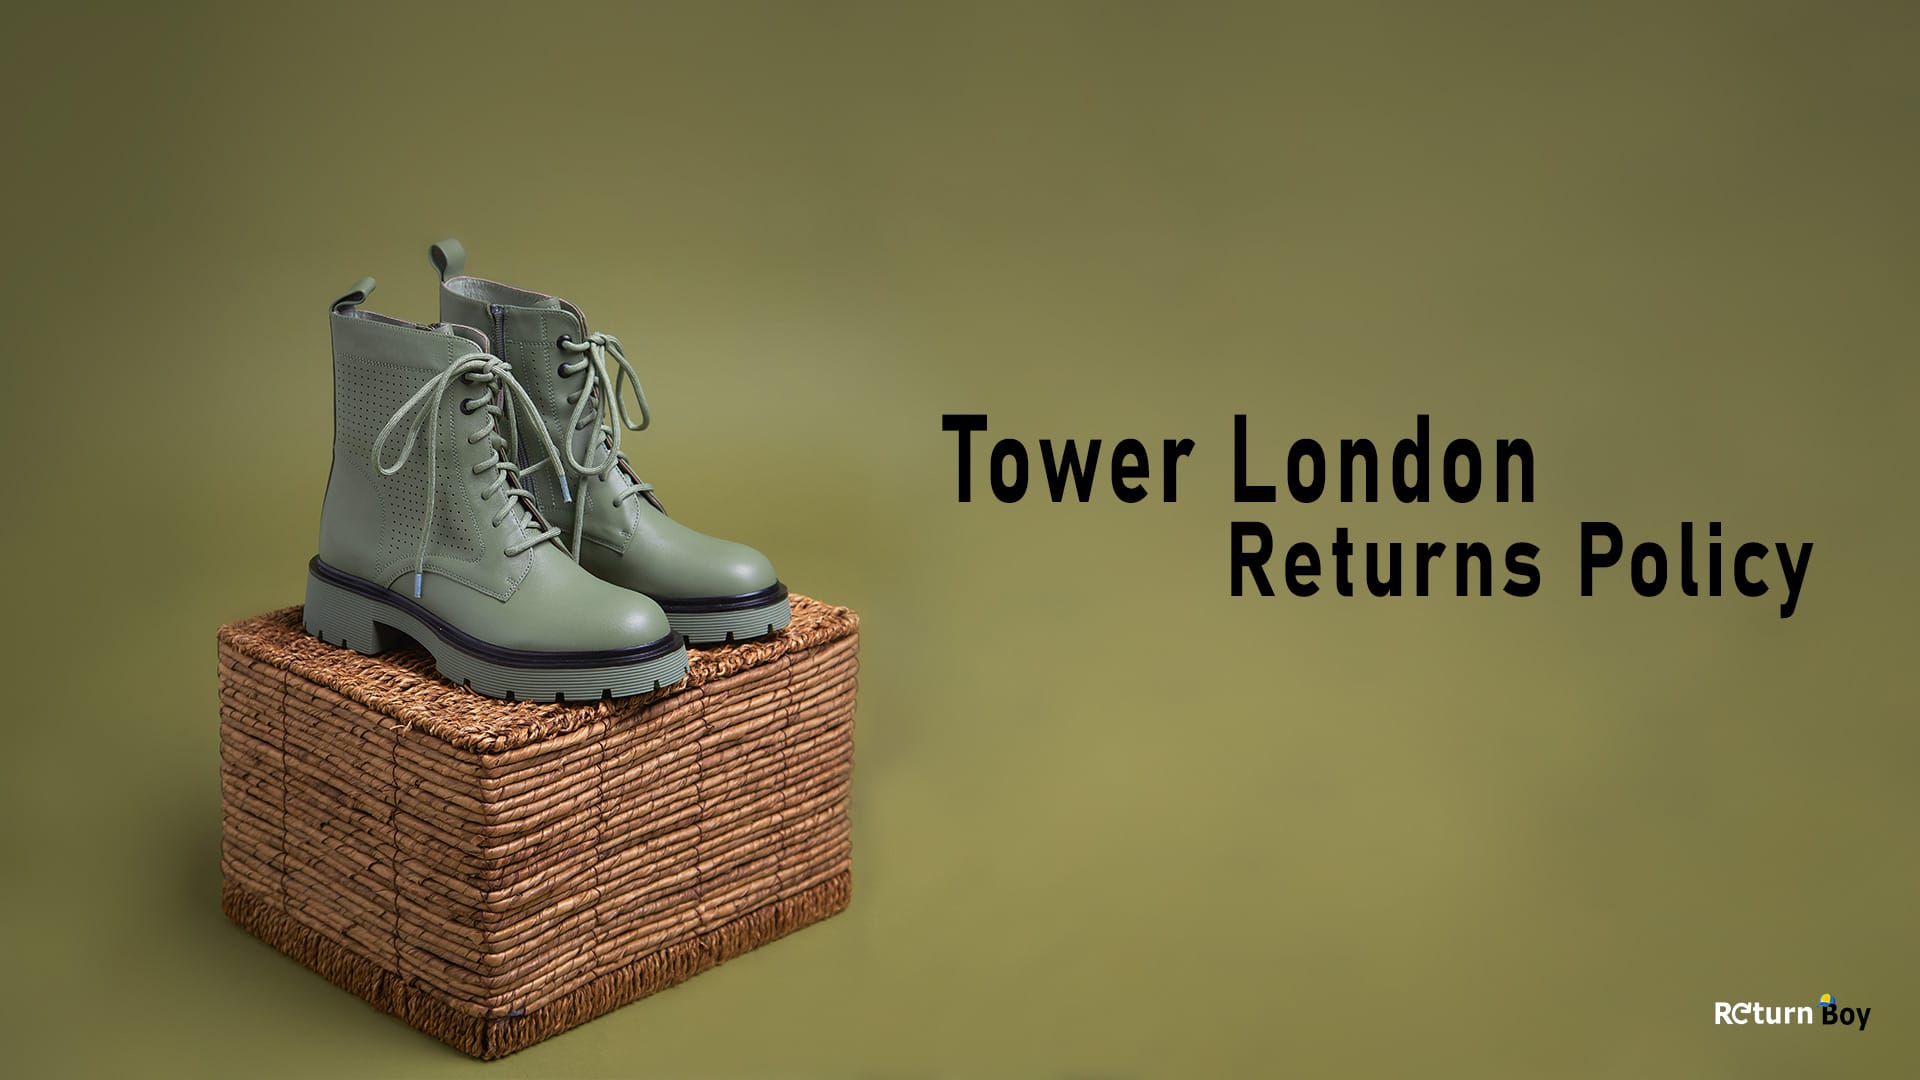 Tower London Returns Policy